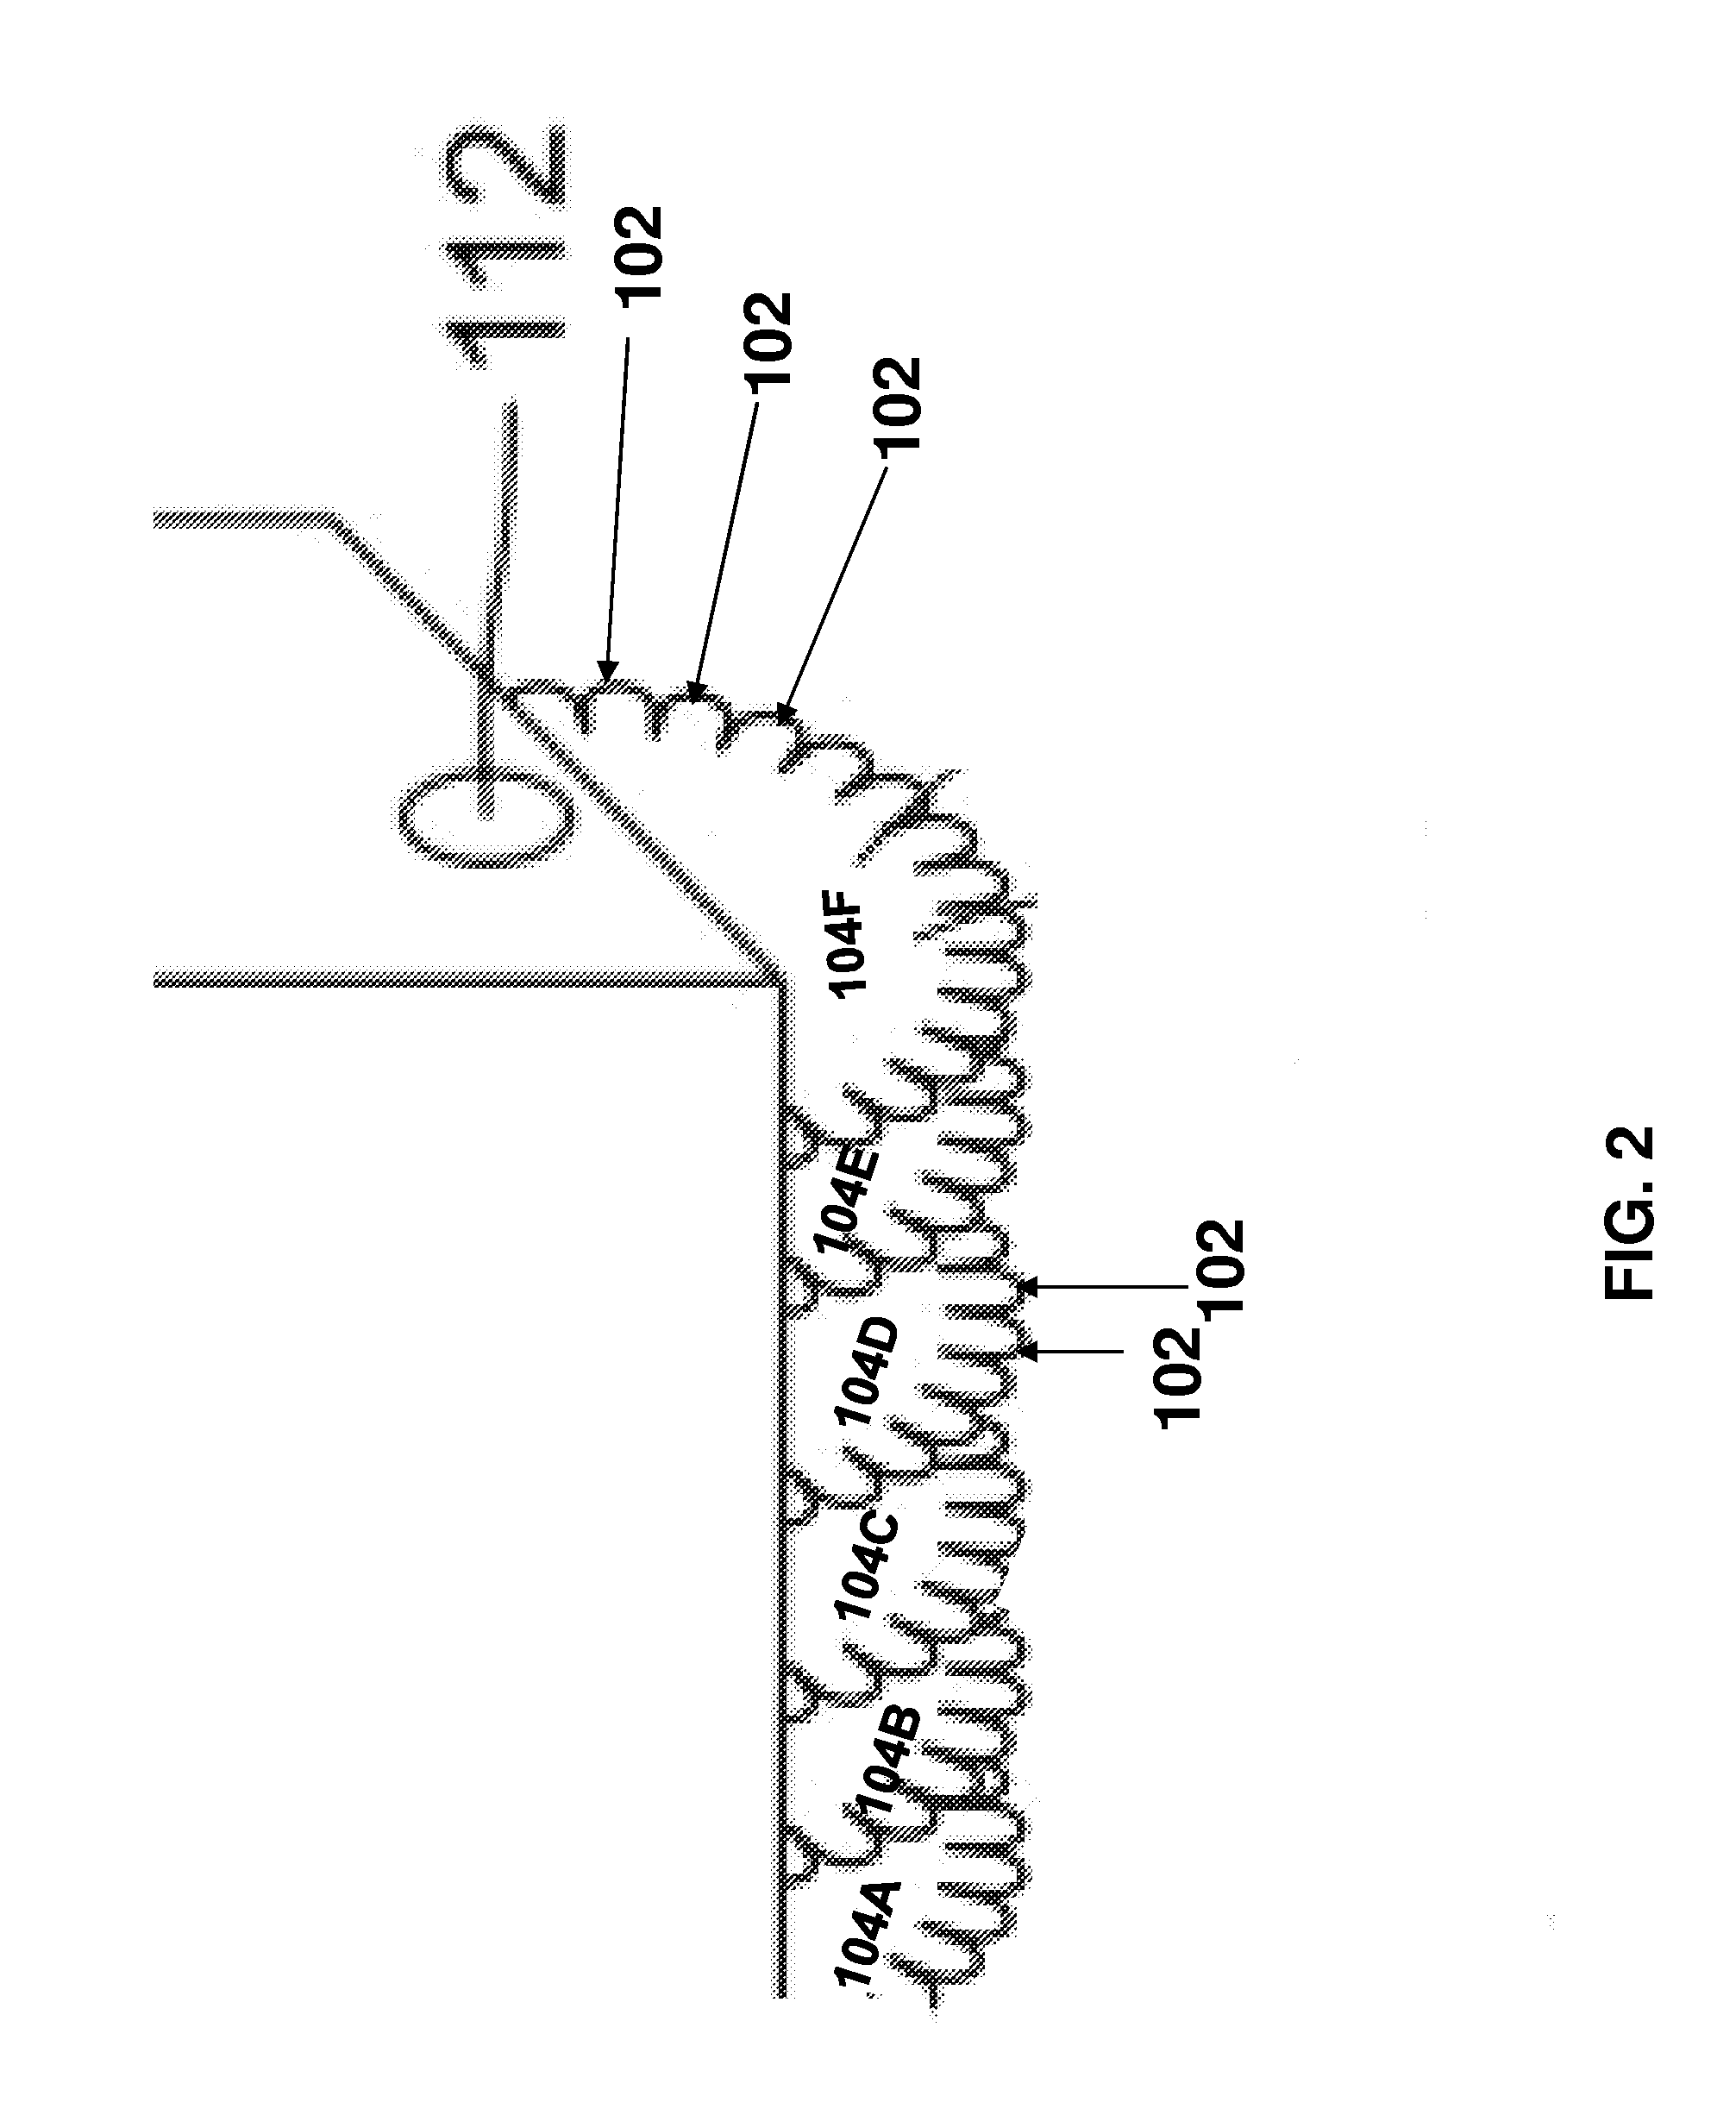 Apparatus and method for stimulating hair growth and/or preventing hair loss